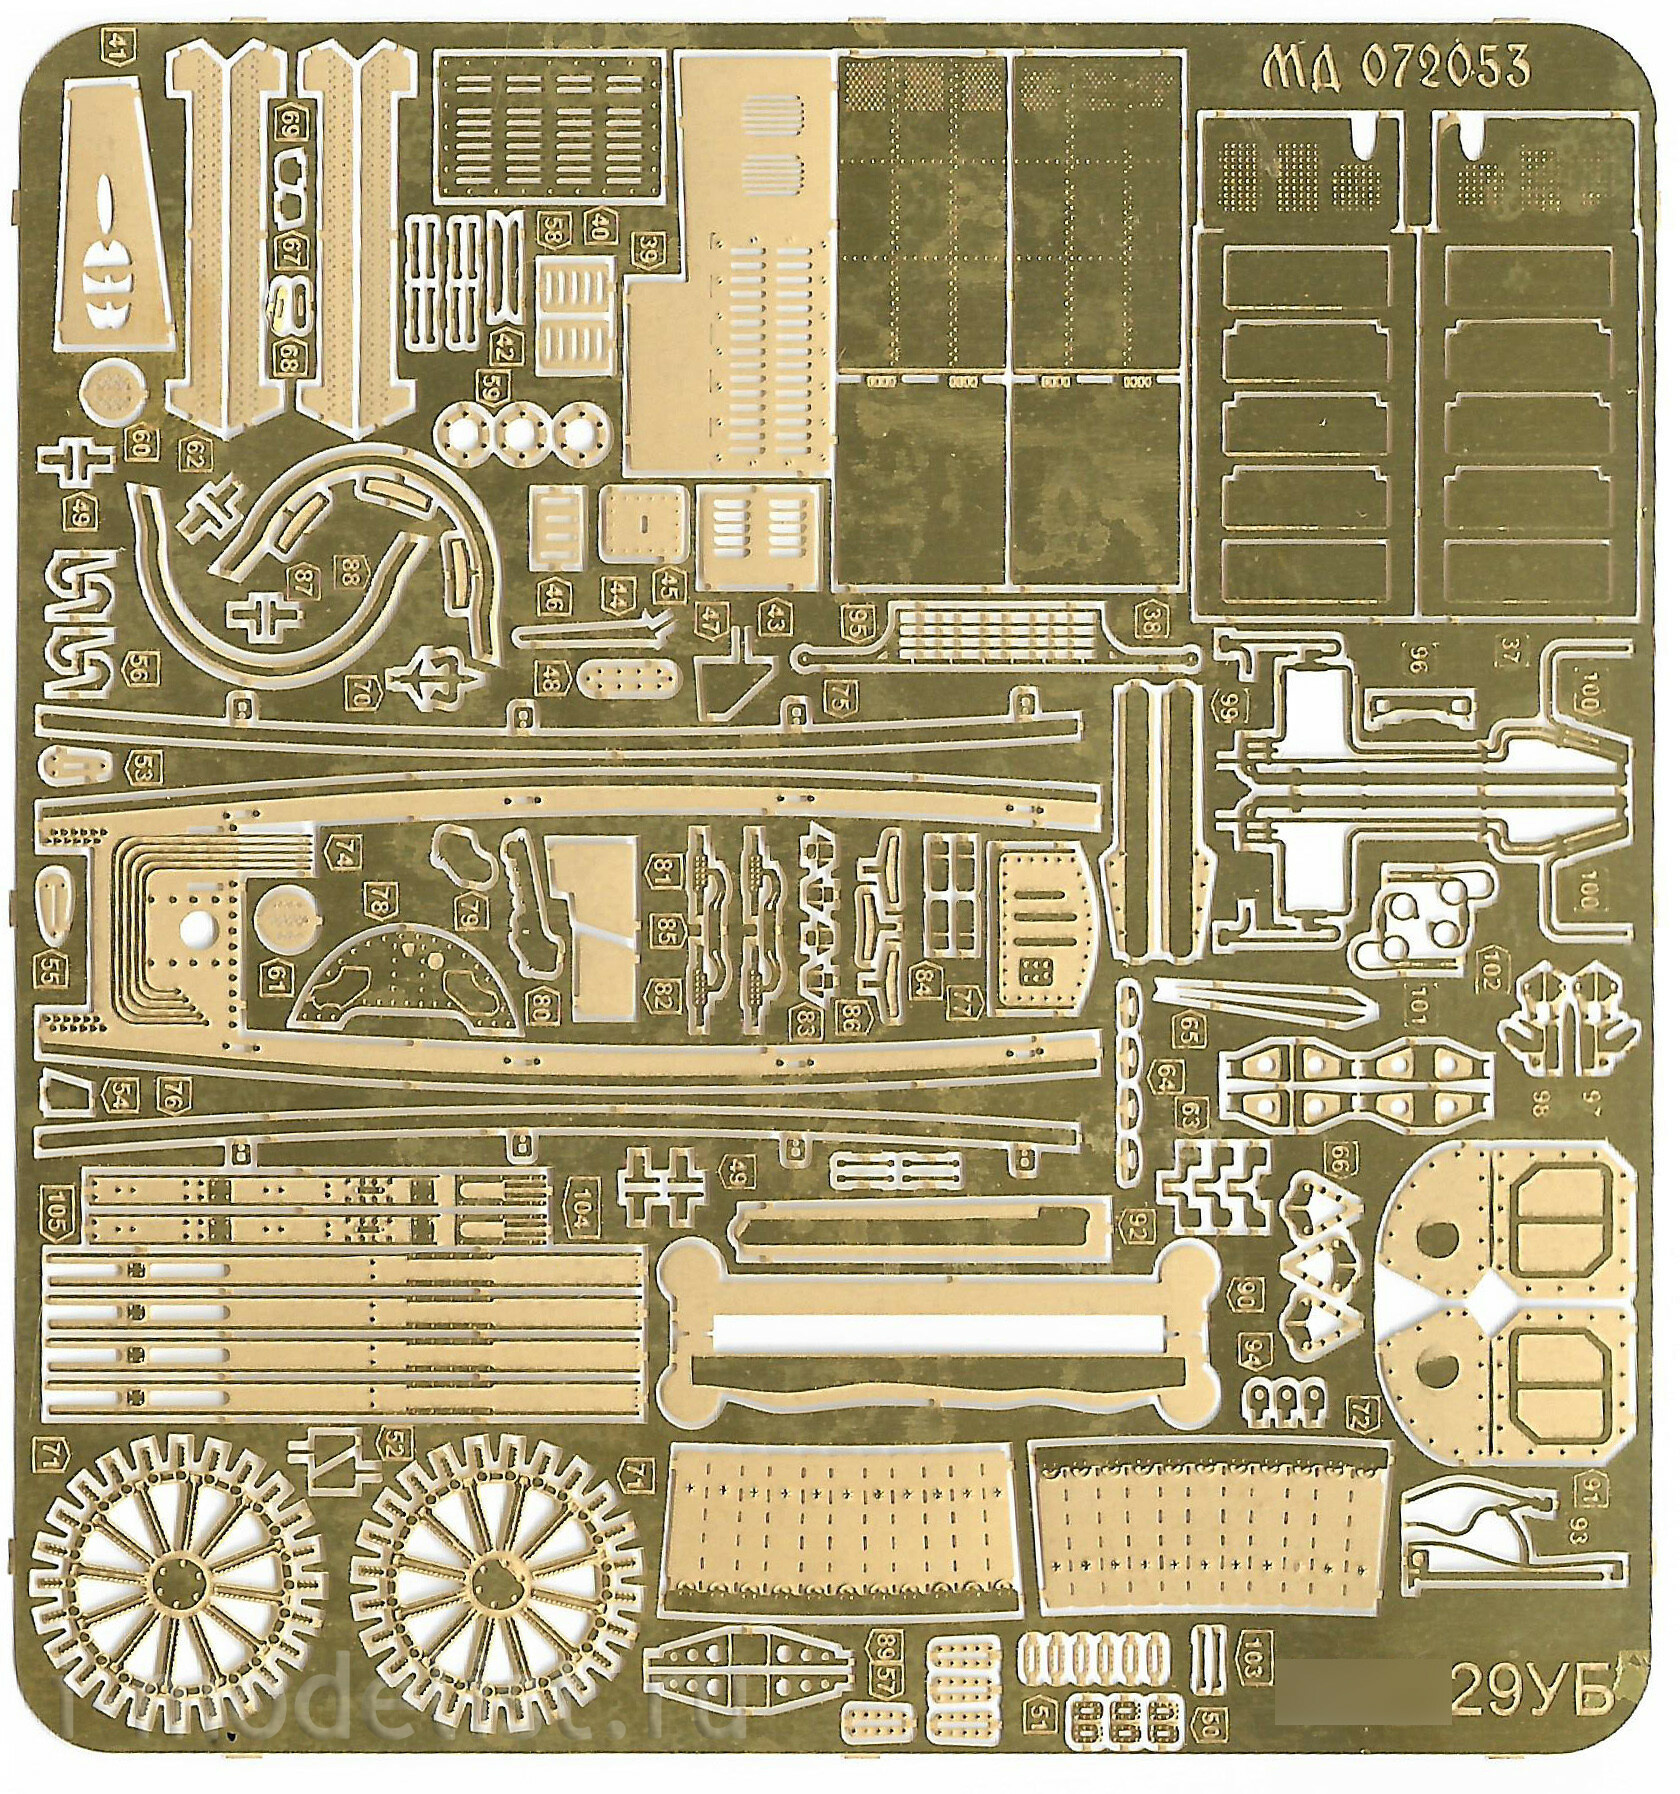 072053 Micro Design 1/72 Set of color photo etching for MiGG-29UB from Trumpeter